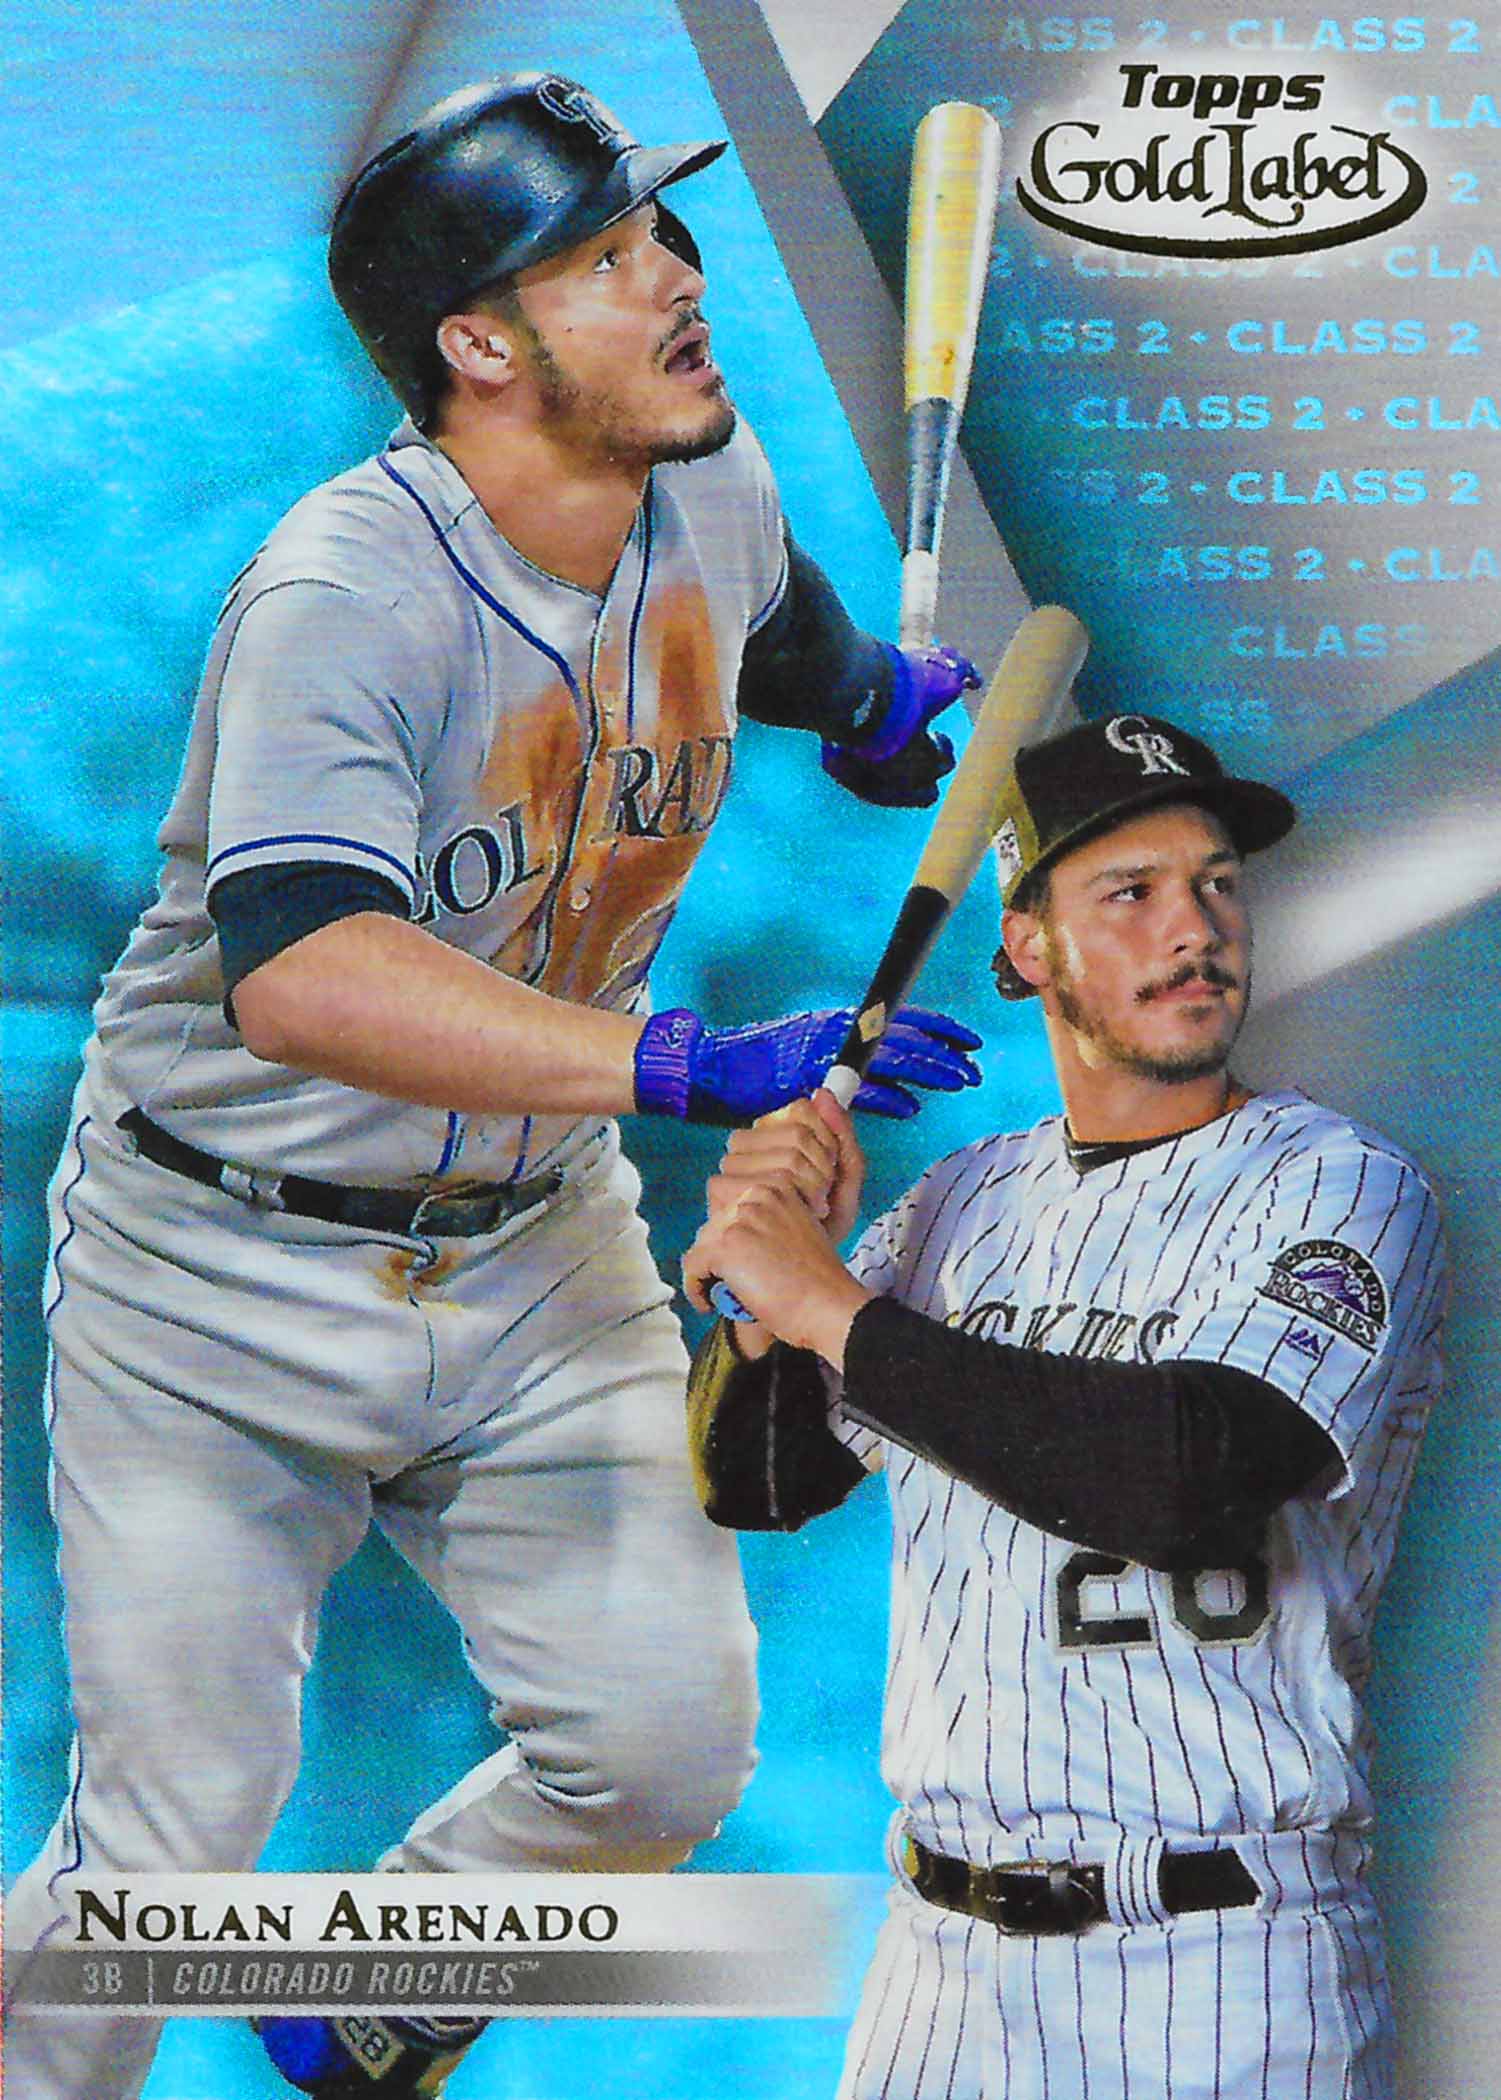 2018 Topps Gold Label Class 2